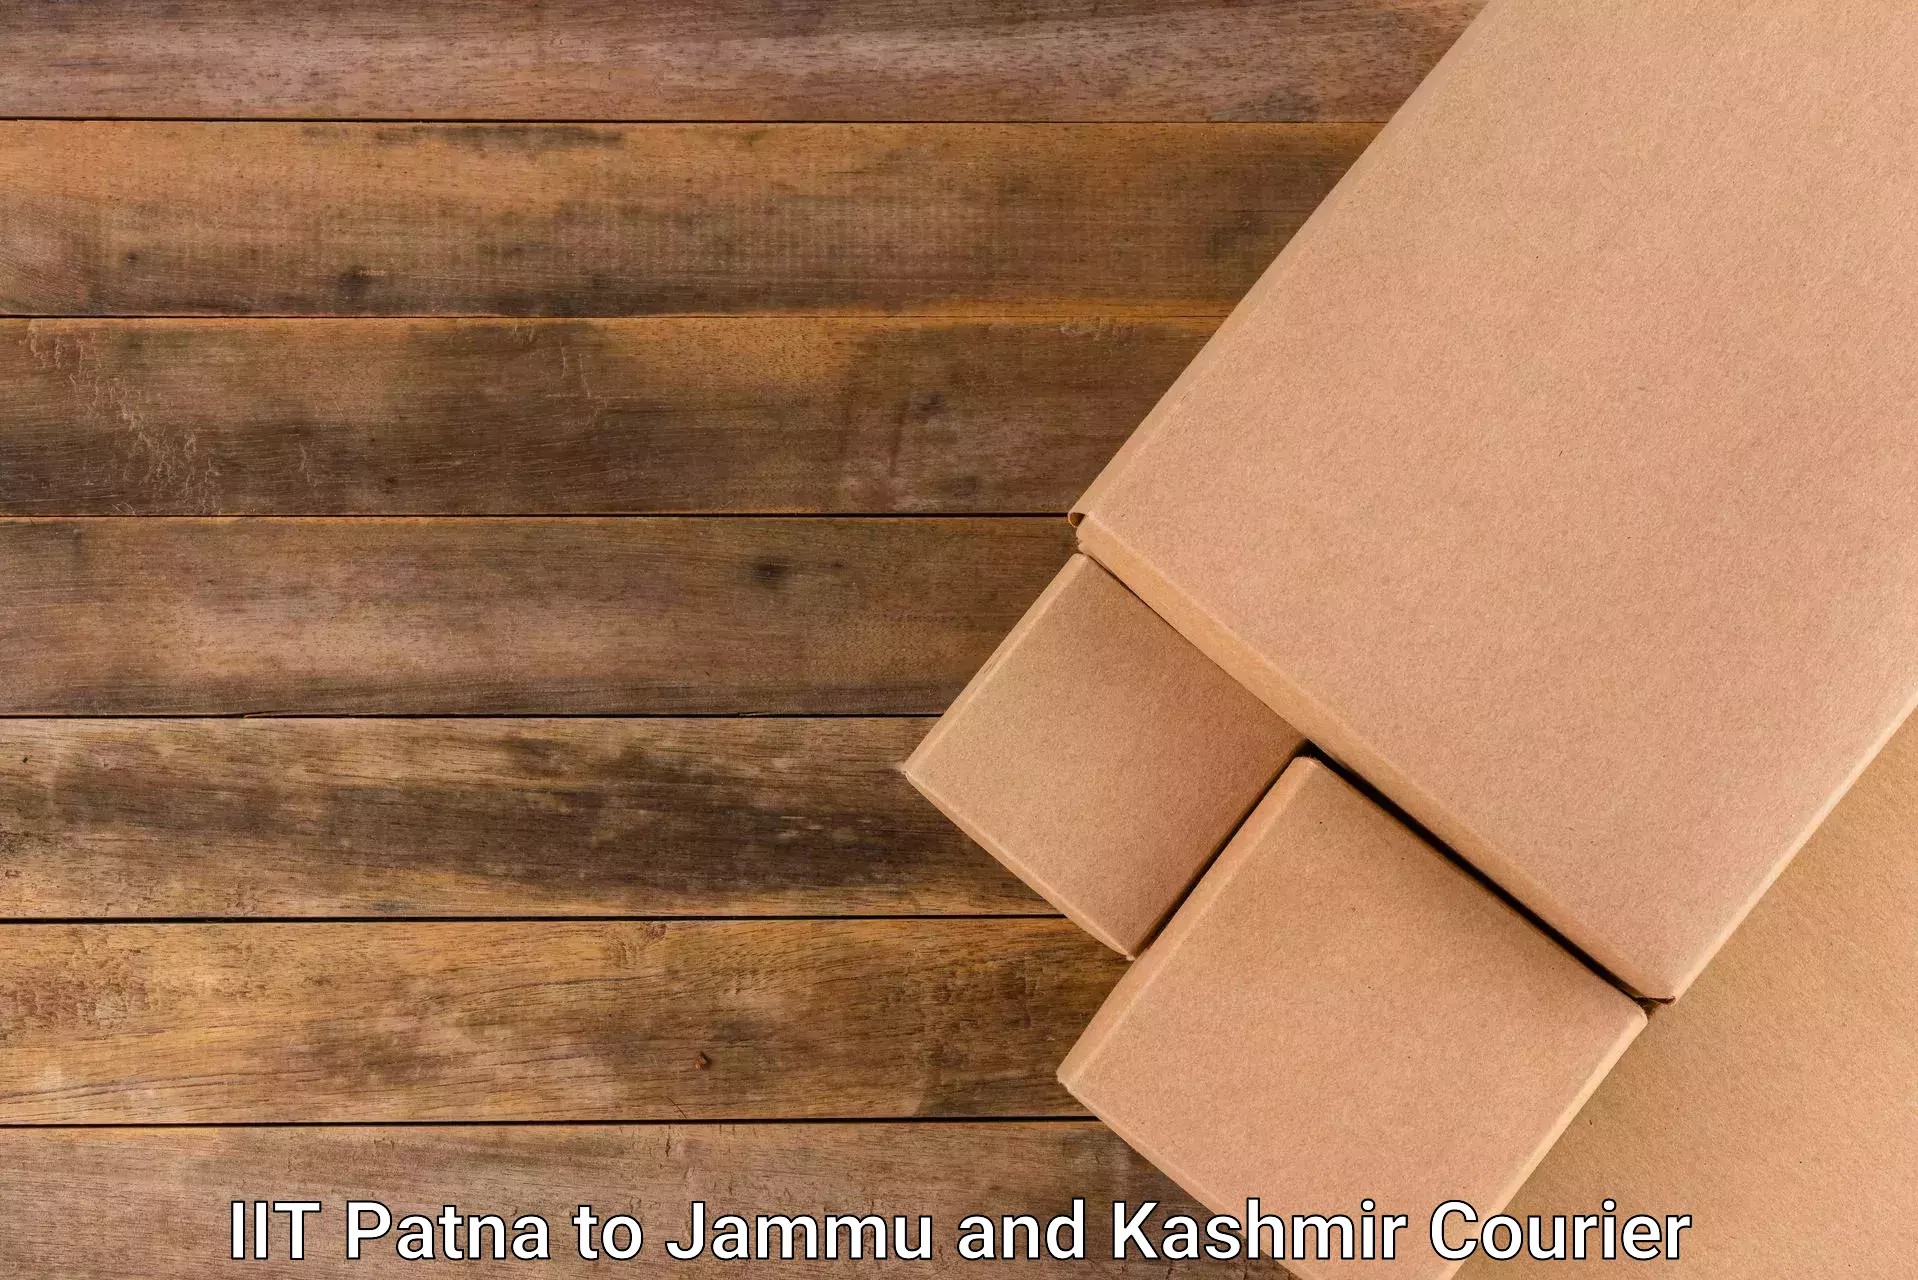 Next day courier in IIT Patna to Jammu and Kashmir